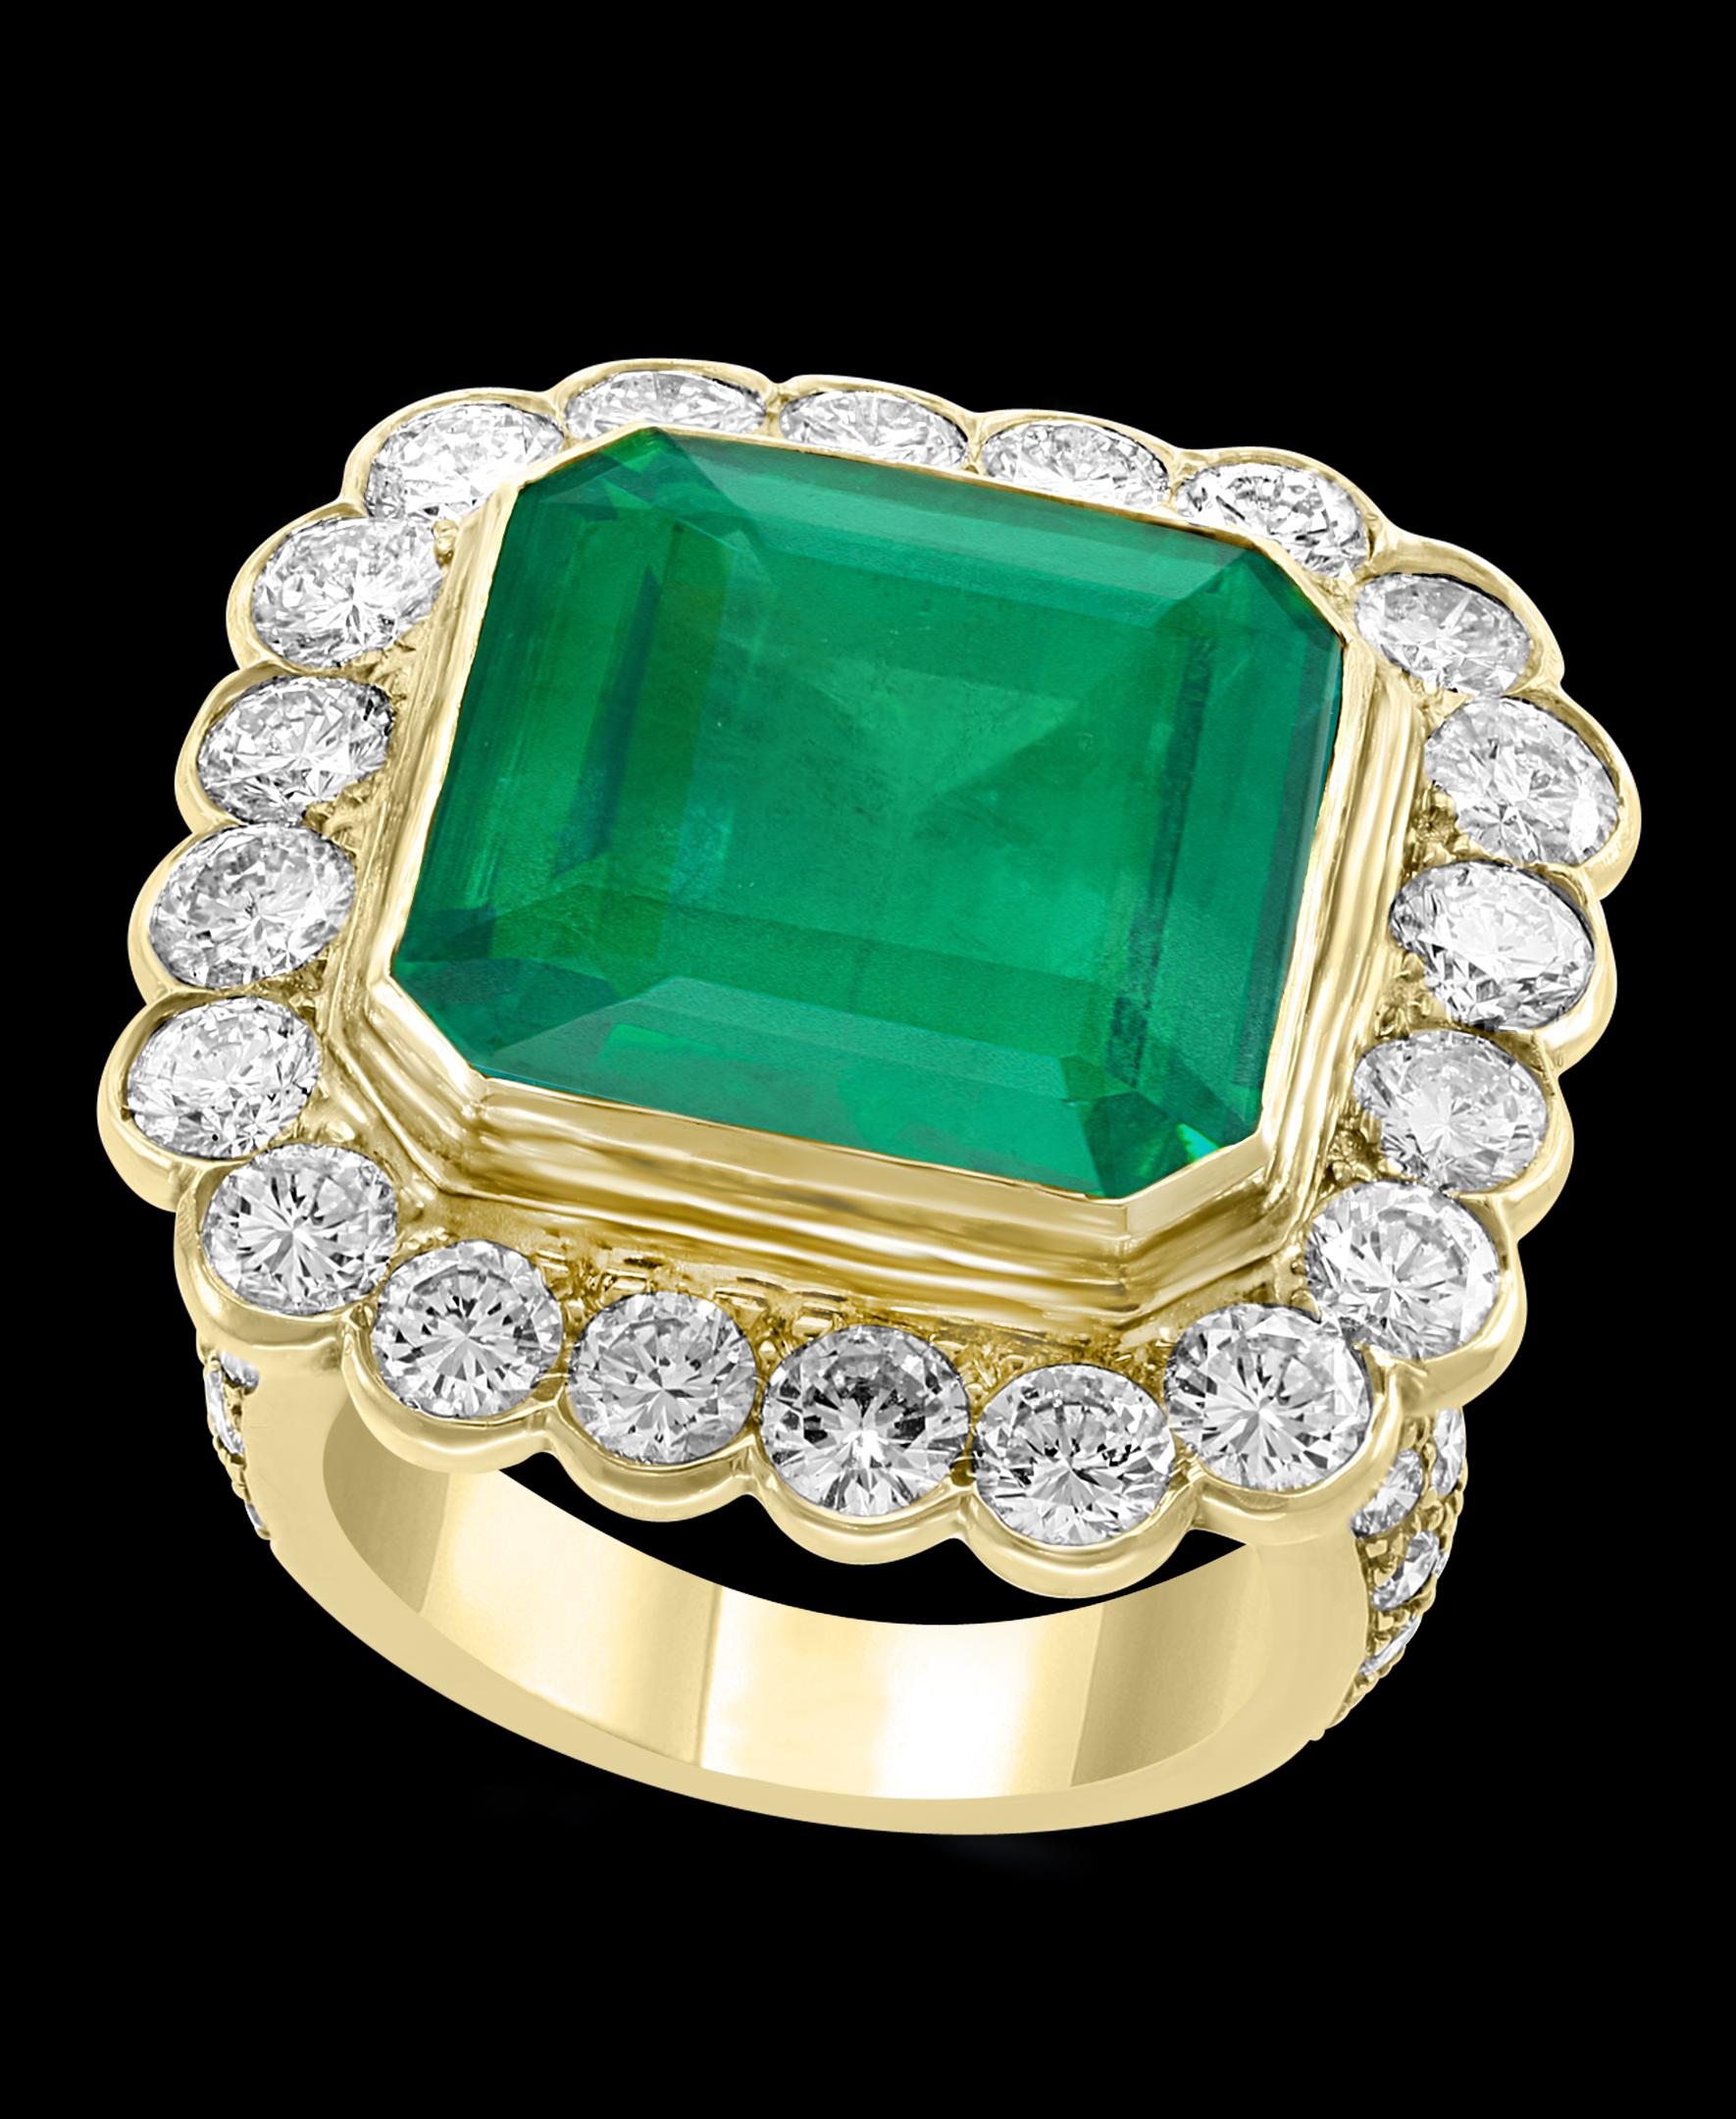 A classic, Cocktail ring , A rare find AGL , Minor, Traditional and super fine emerald , super large size and everything about this ring is super fine.
AGL Certified Minor Traditional 17.5 Ct Emerald Cut Colombian Emerald  Ring
Emerald is certified